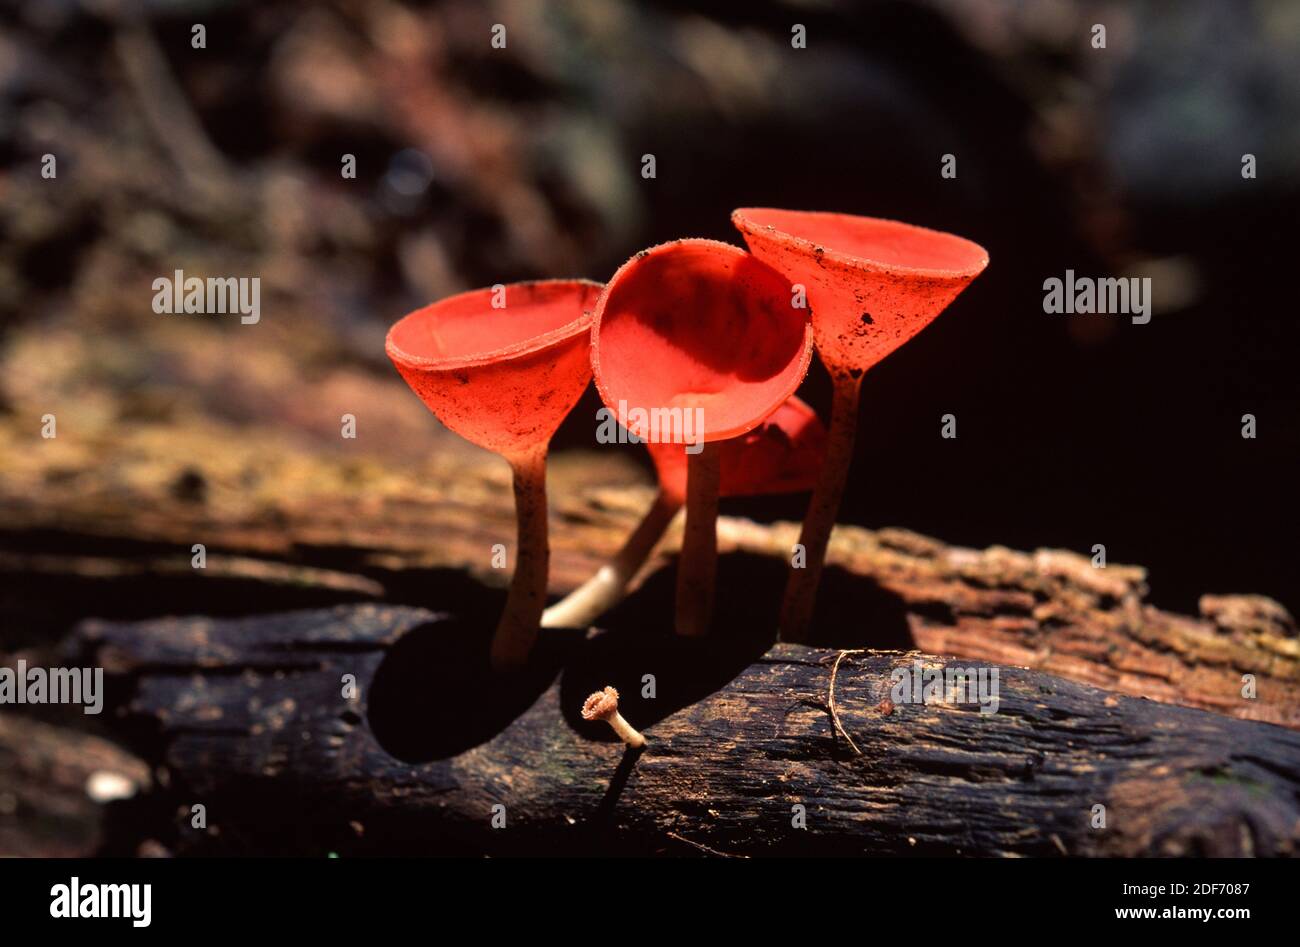 Western scarlet cup (Sarcoscypha occidentalis) is an inedible fungus. This photo was taken in Costa Rica. Stock Photo